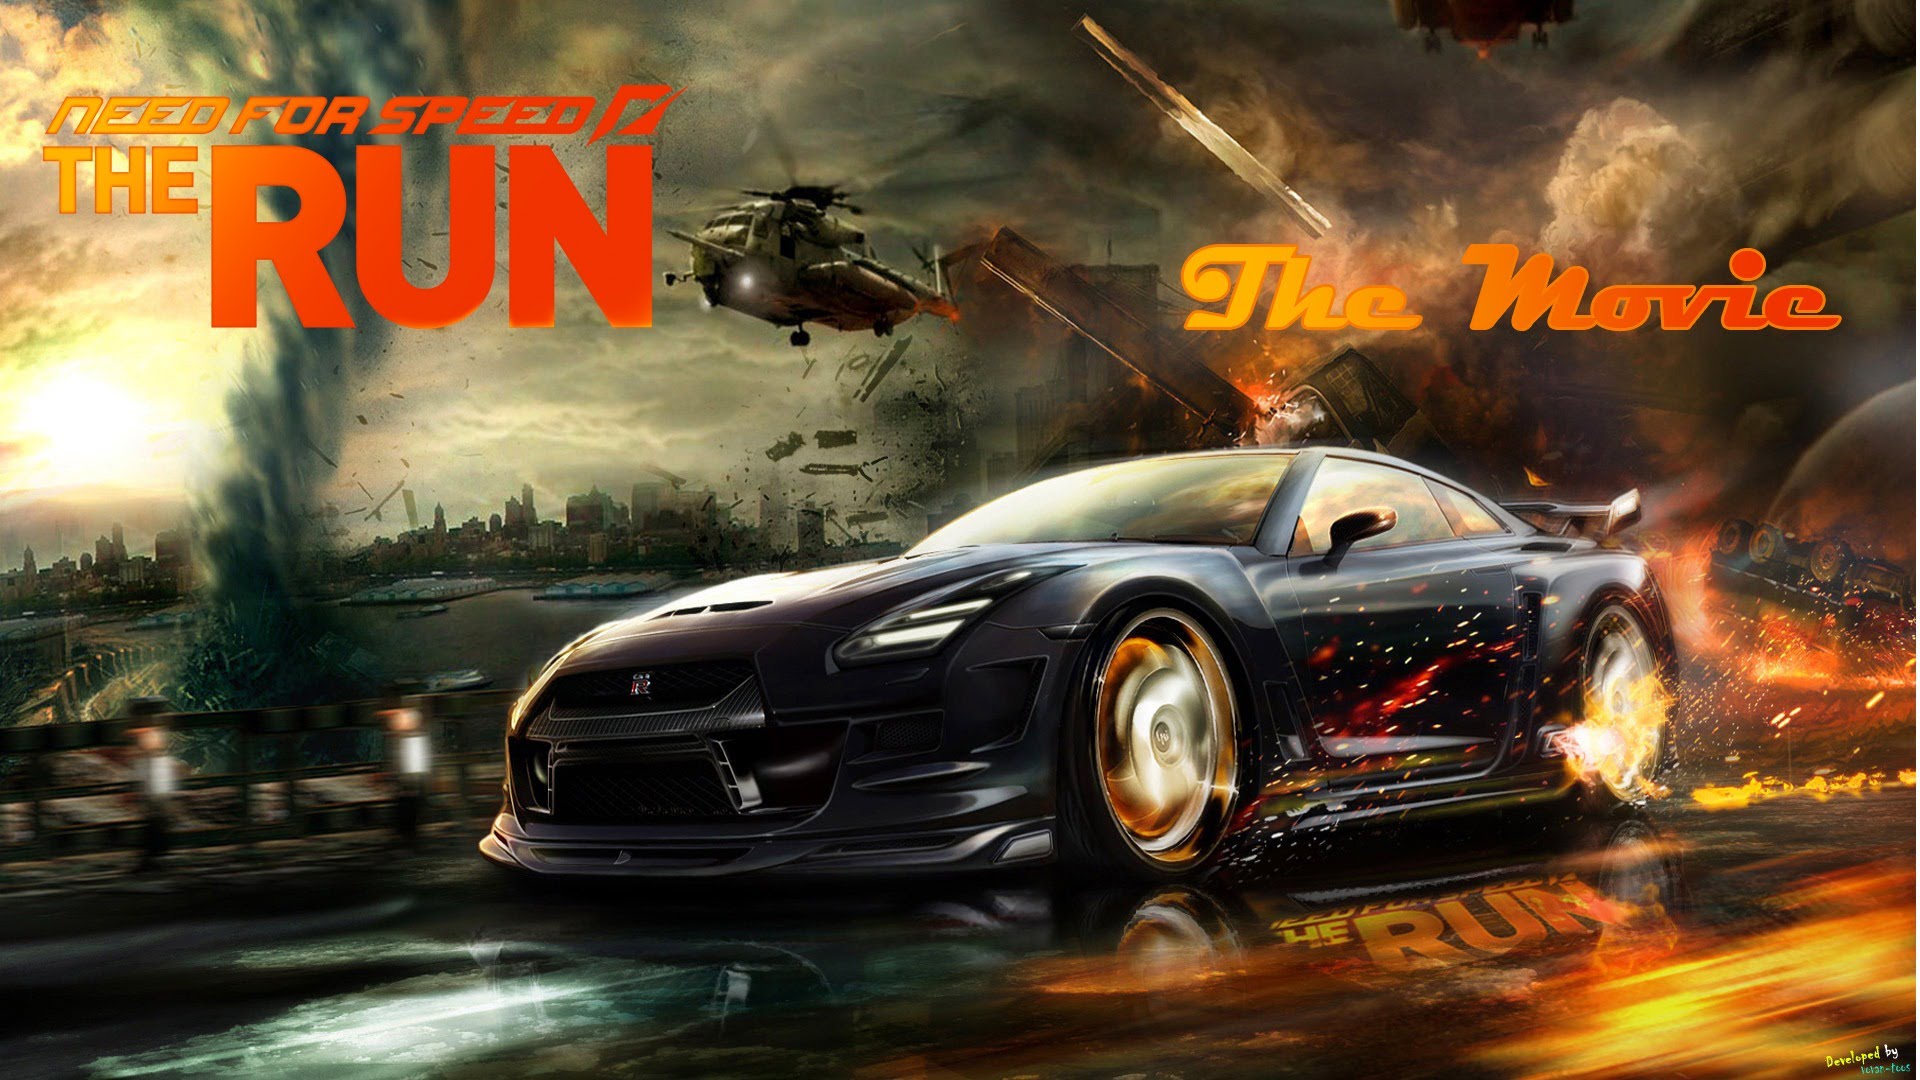 Need For Speed: The Run Backgrounds, Compatible - PC, Mobile, Gadgets| 1920x1080 px